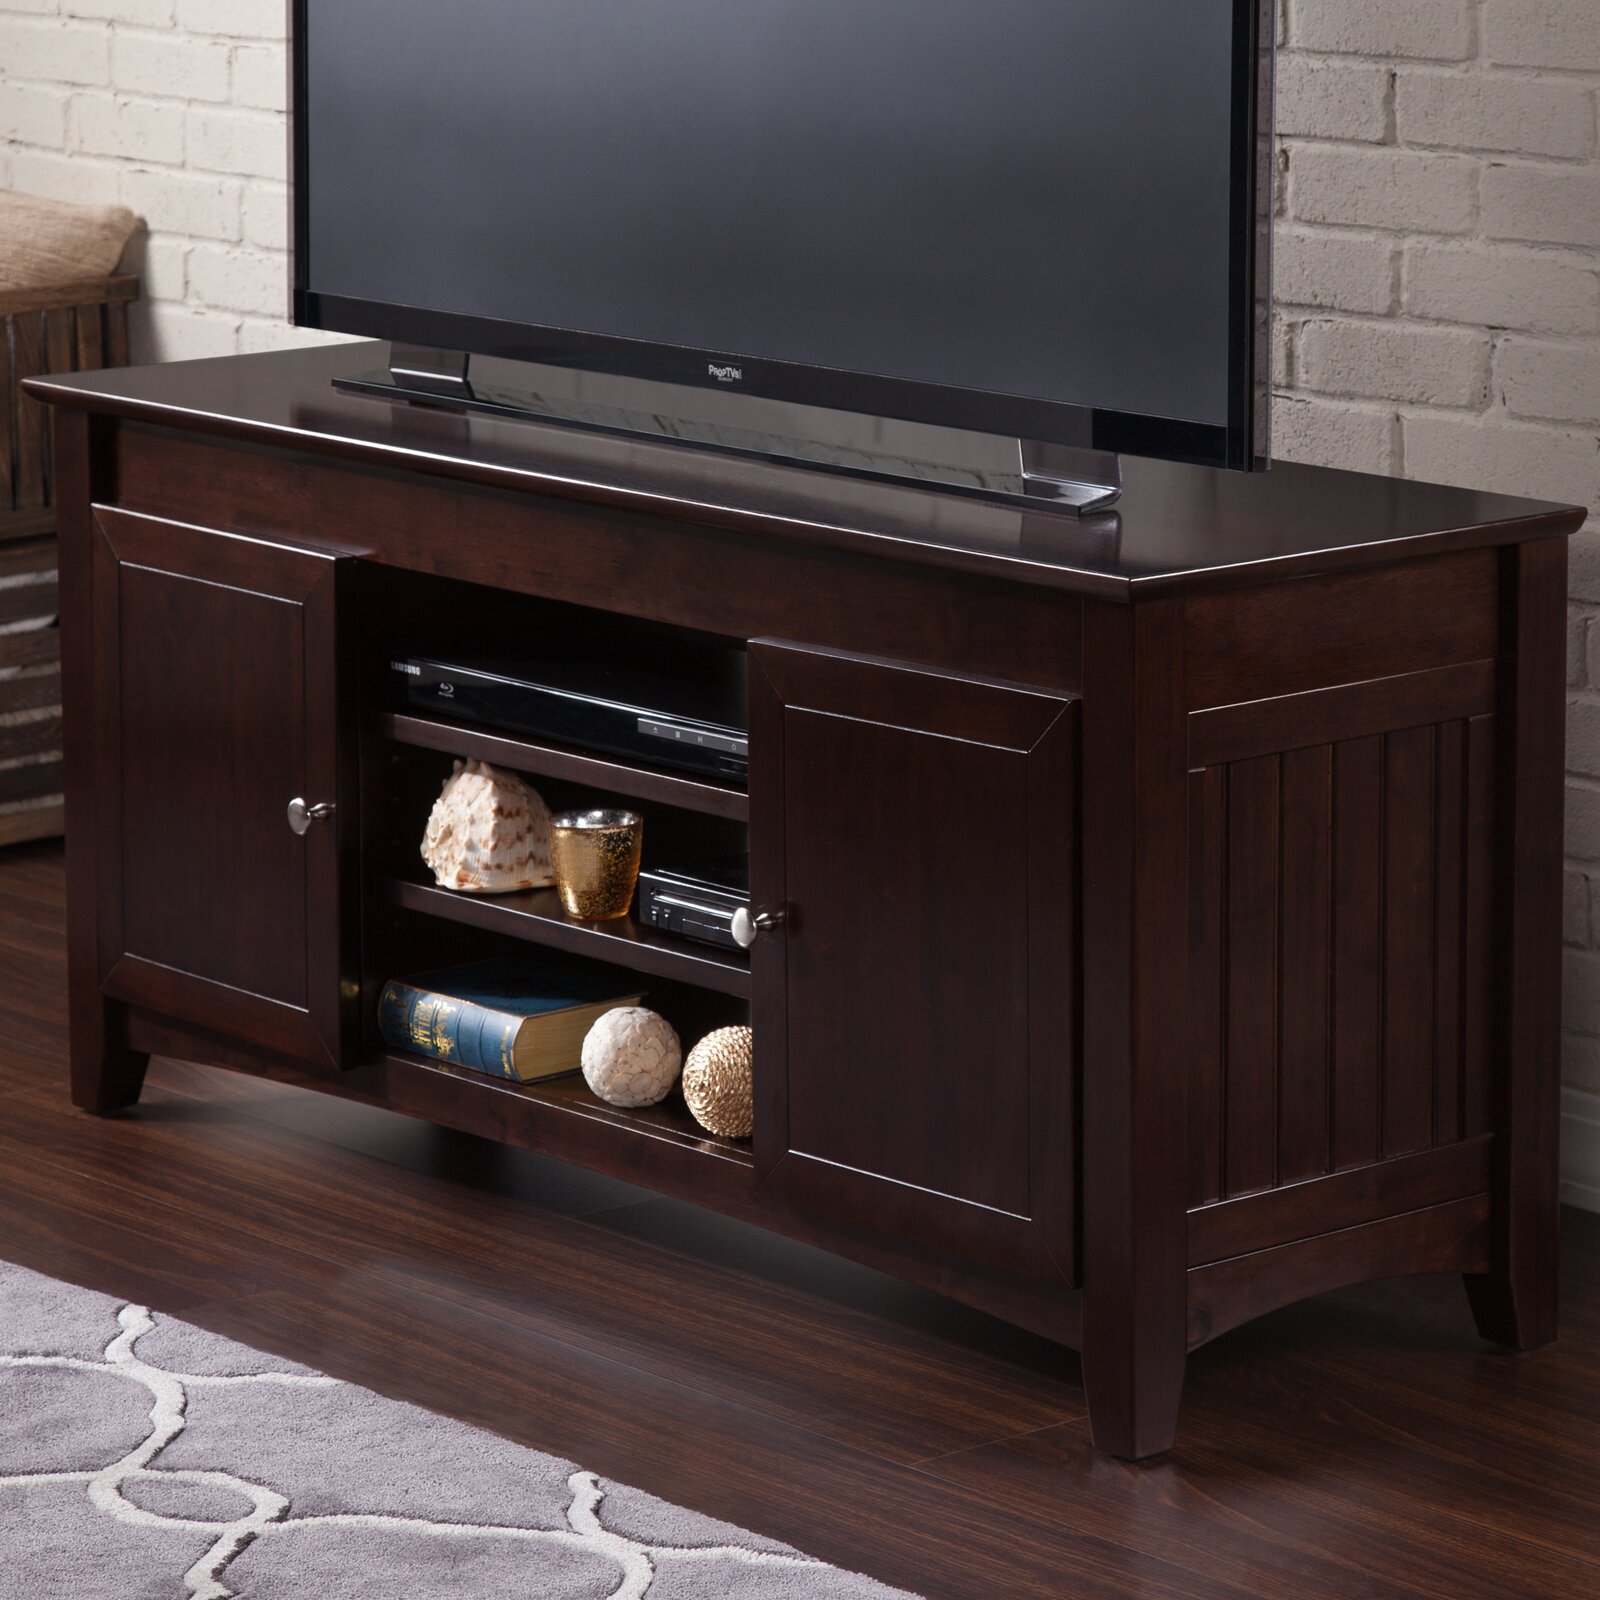 Darby Home Co Pinckney Tv Stand With Adjustable Shelves And Reviews Wayfair